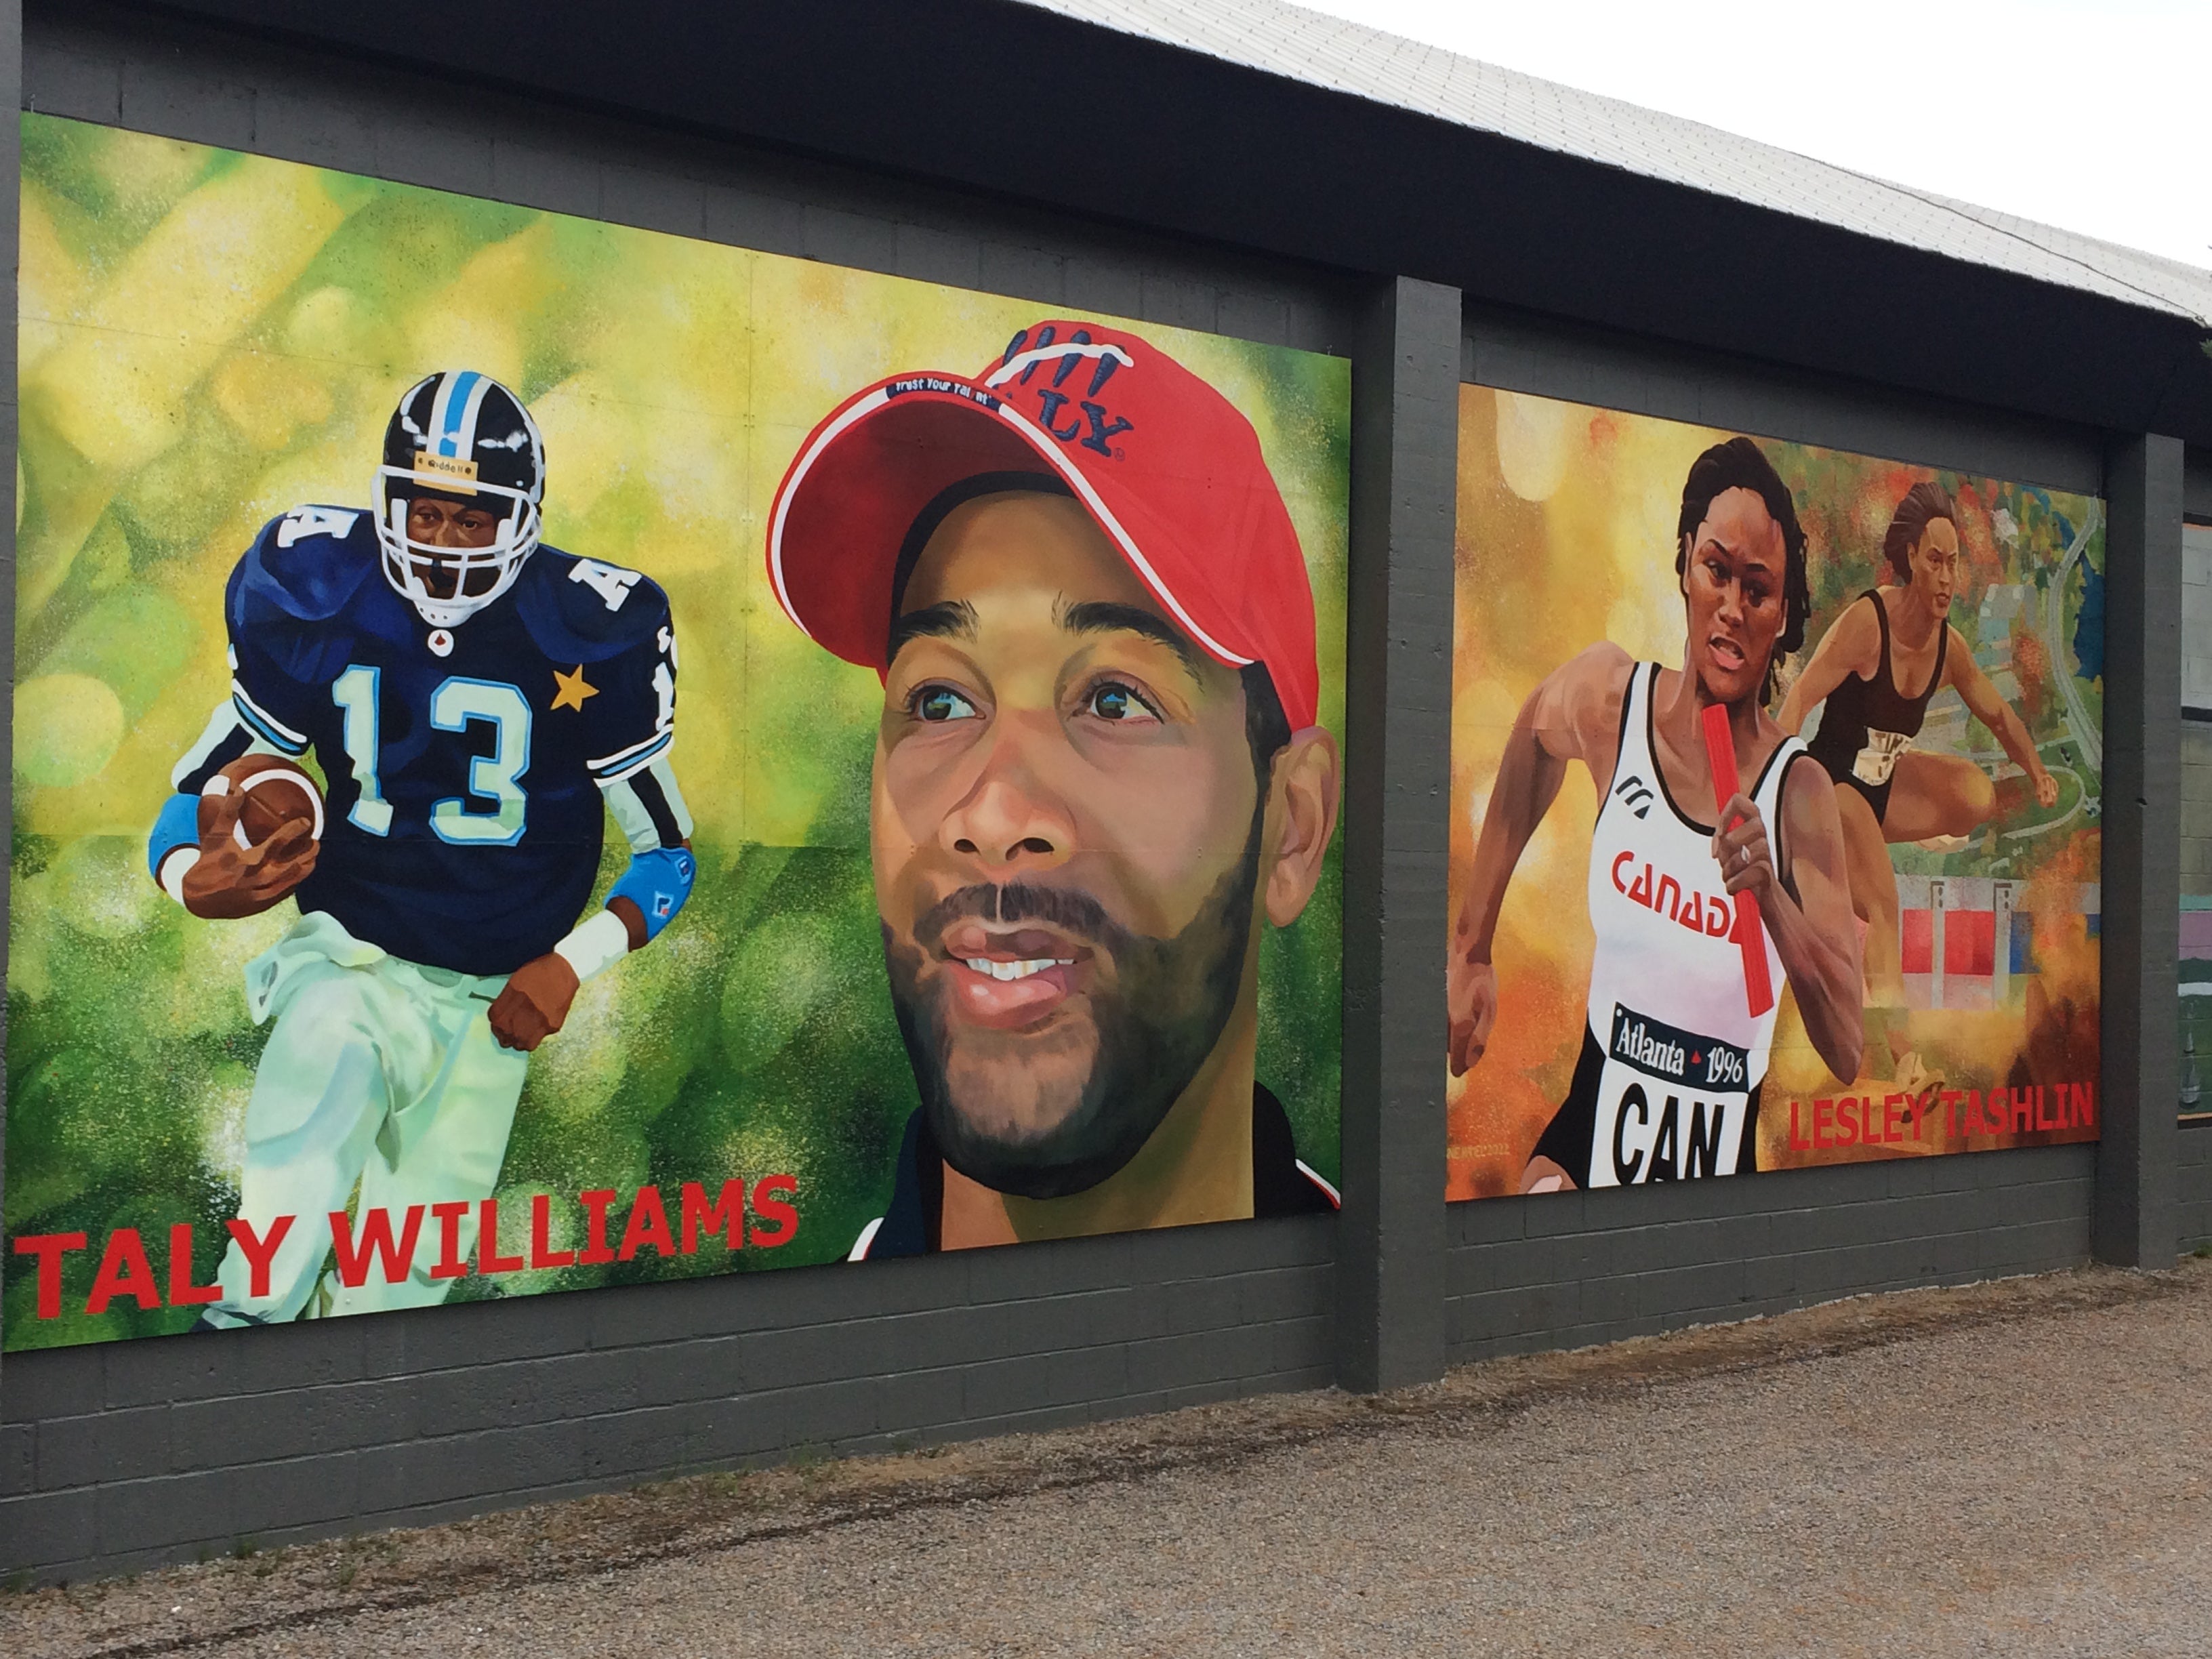 Murals of Taly Williams and his sister Lesley Tashlin on the arena wall in their hometown of Haliburton, Ontario.